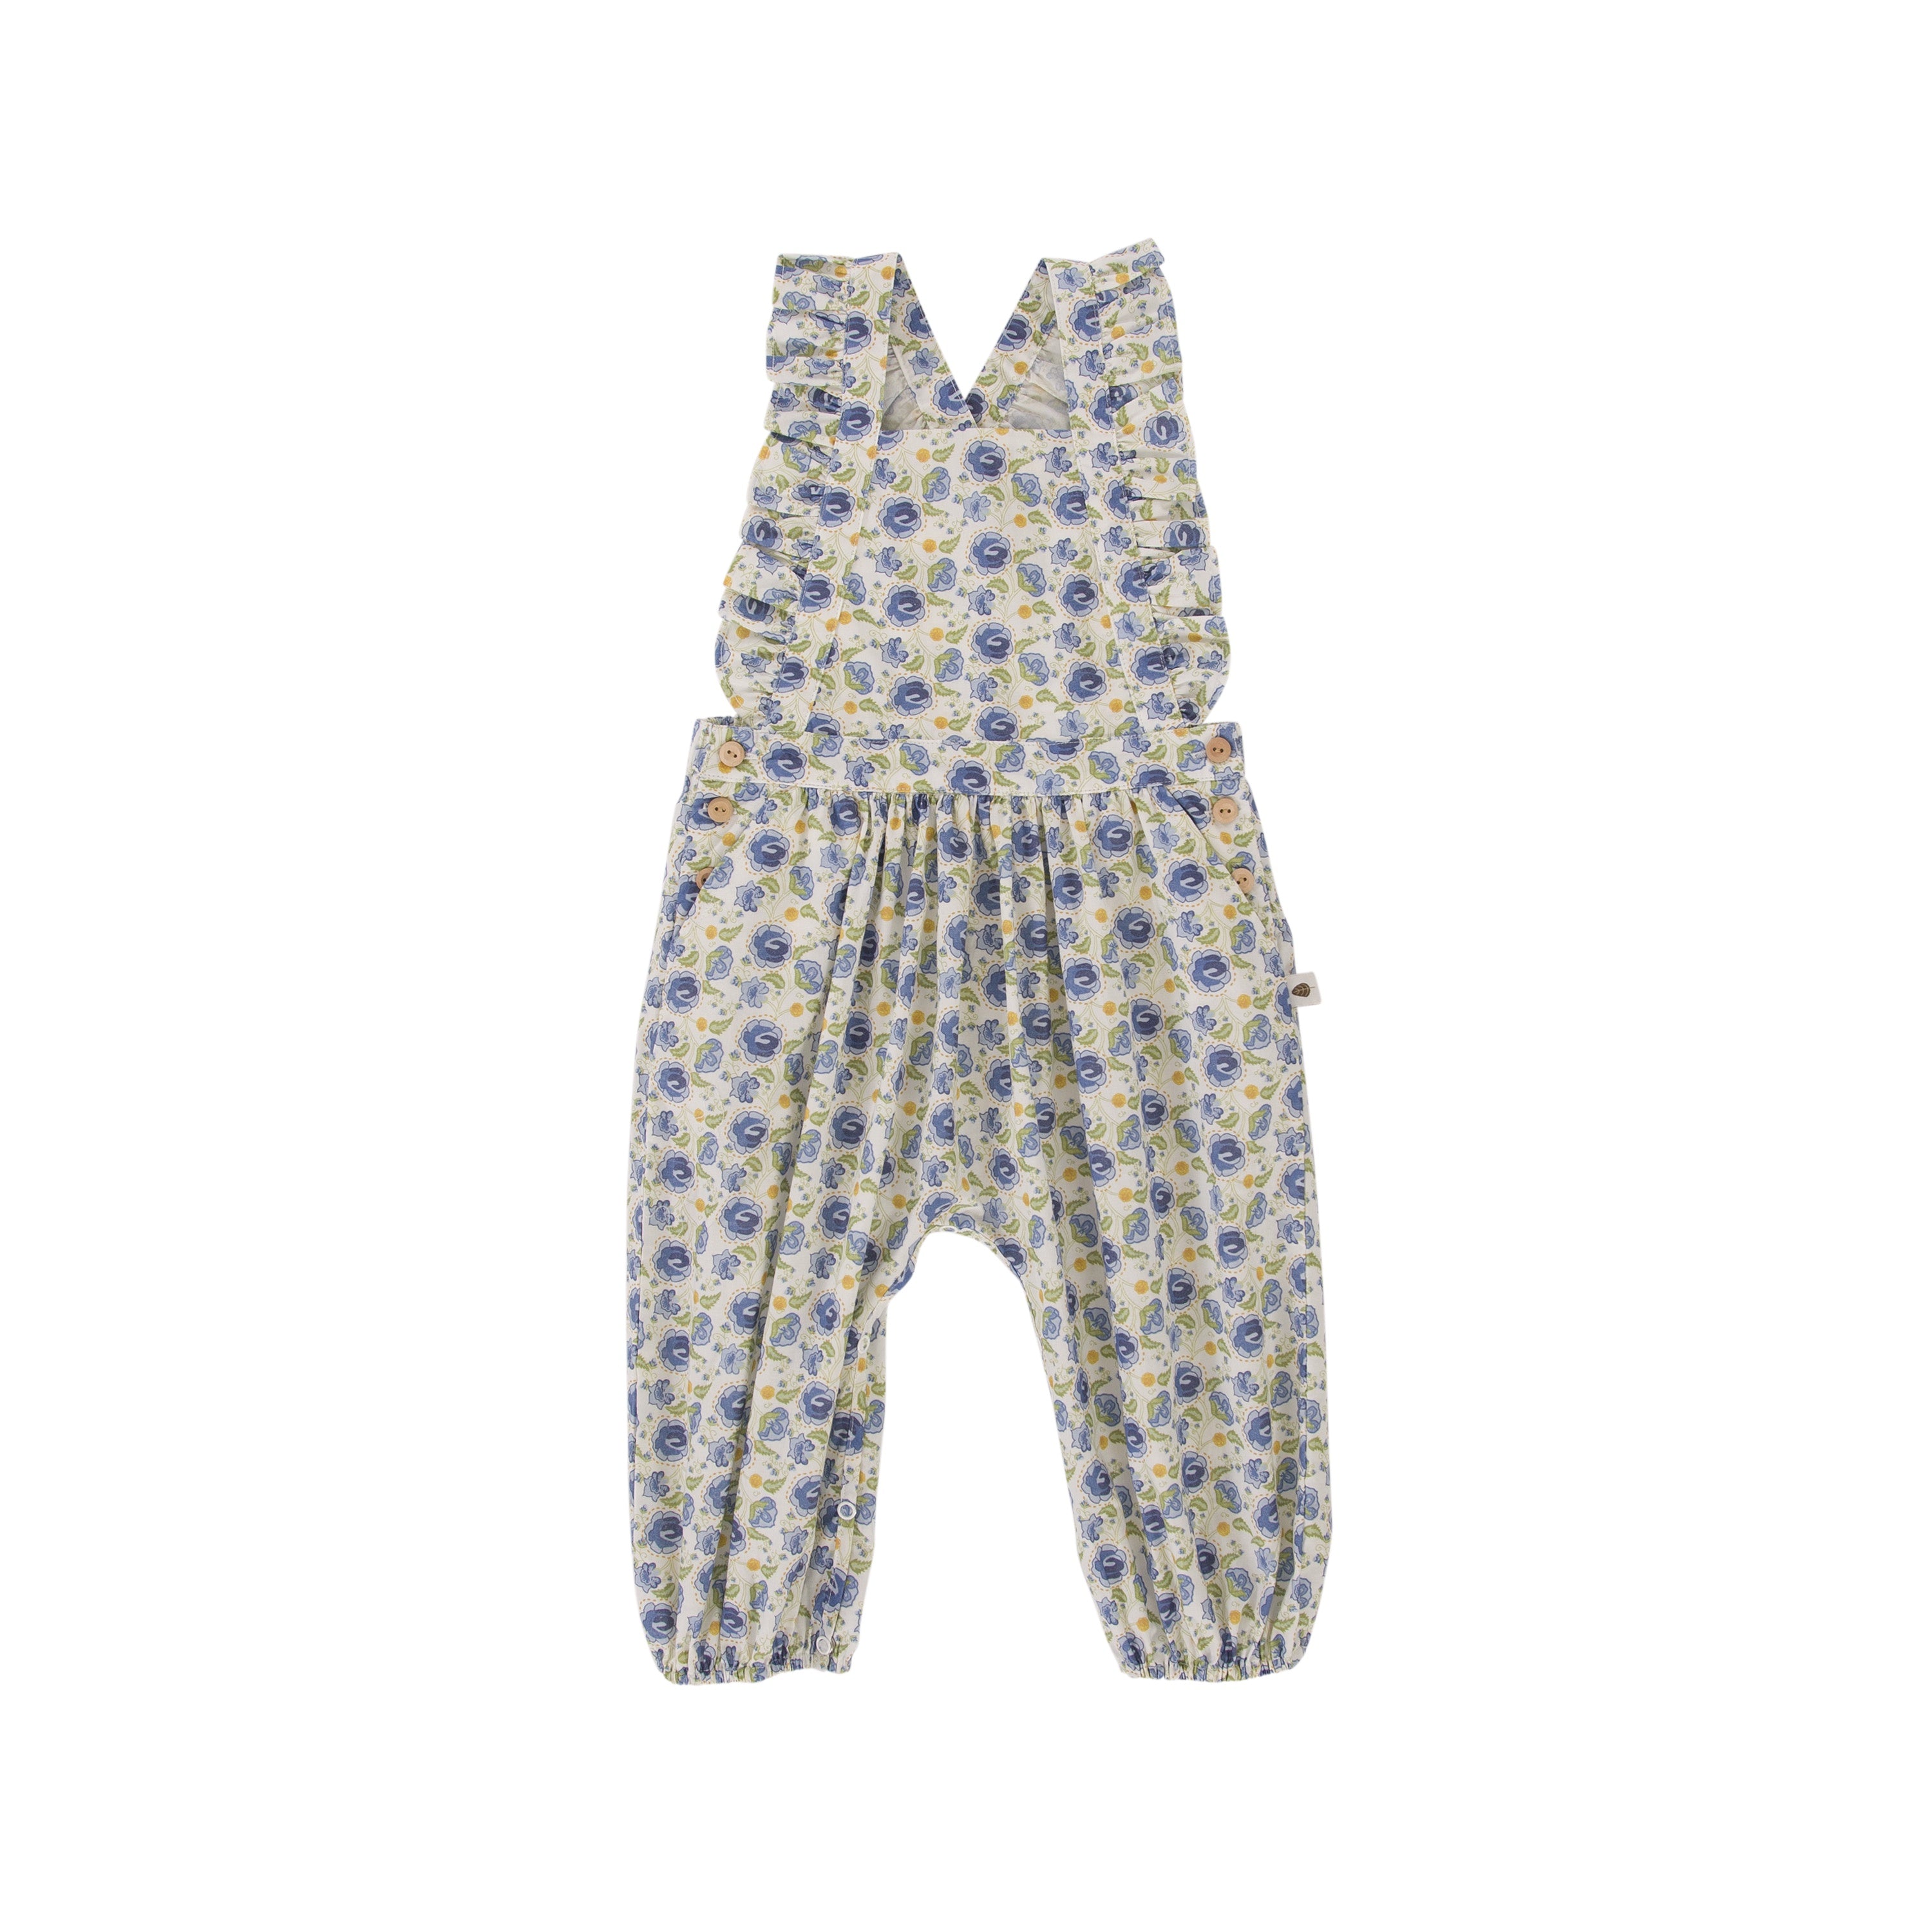 Peggy - Sidney Playsuit - Blue Floral – Fox in Sox Kids